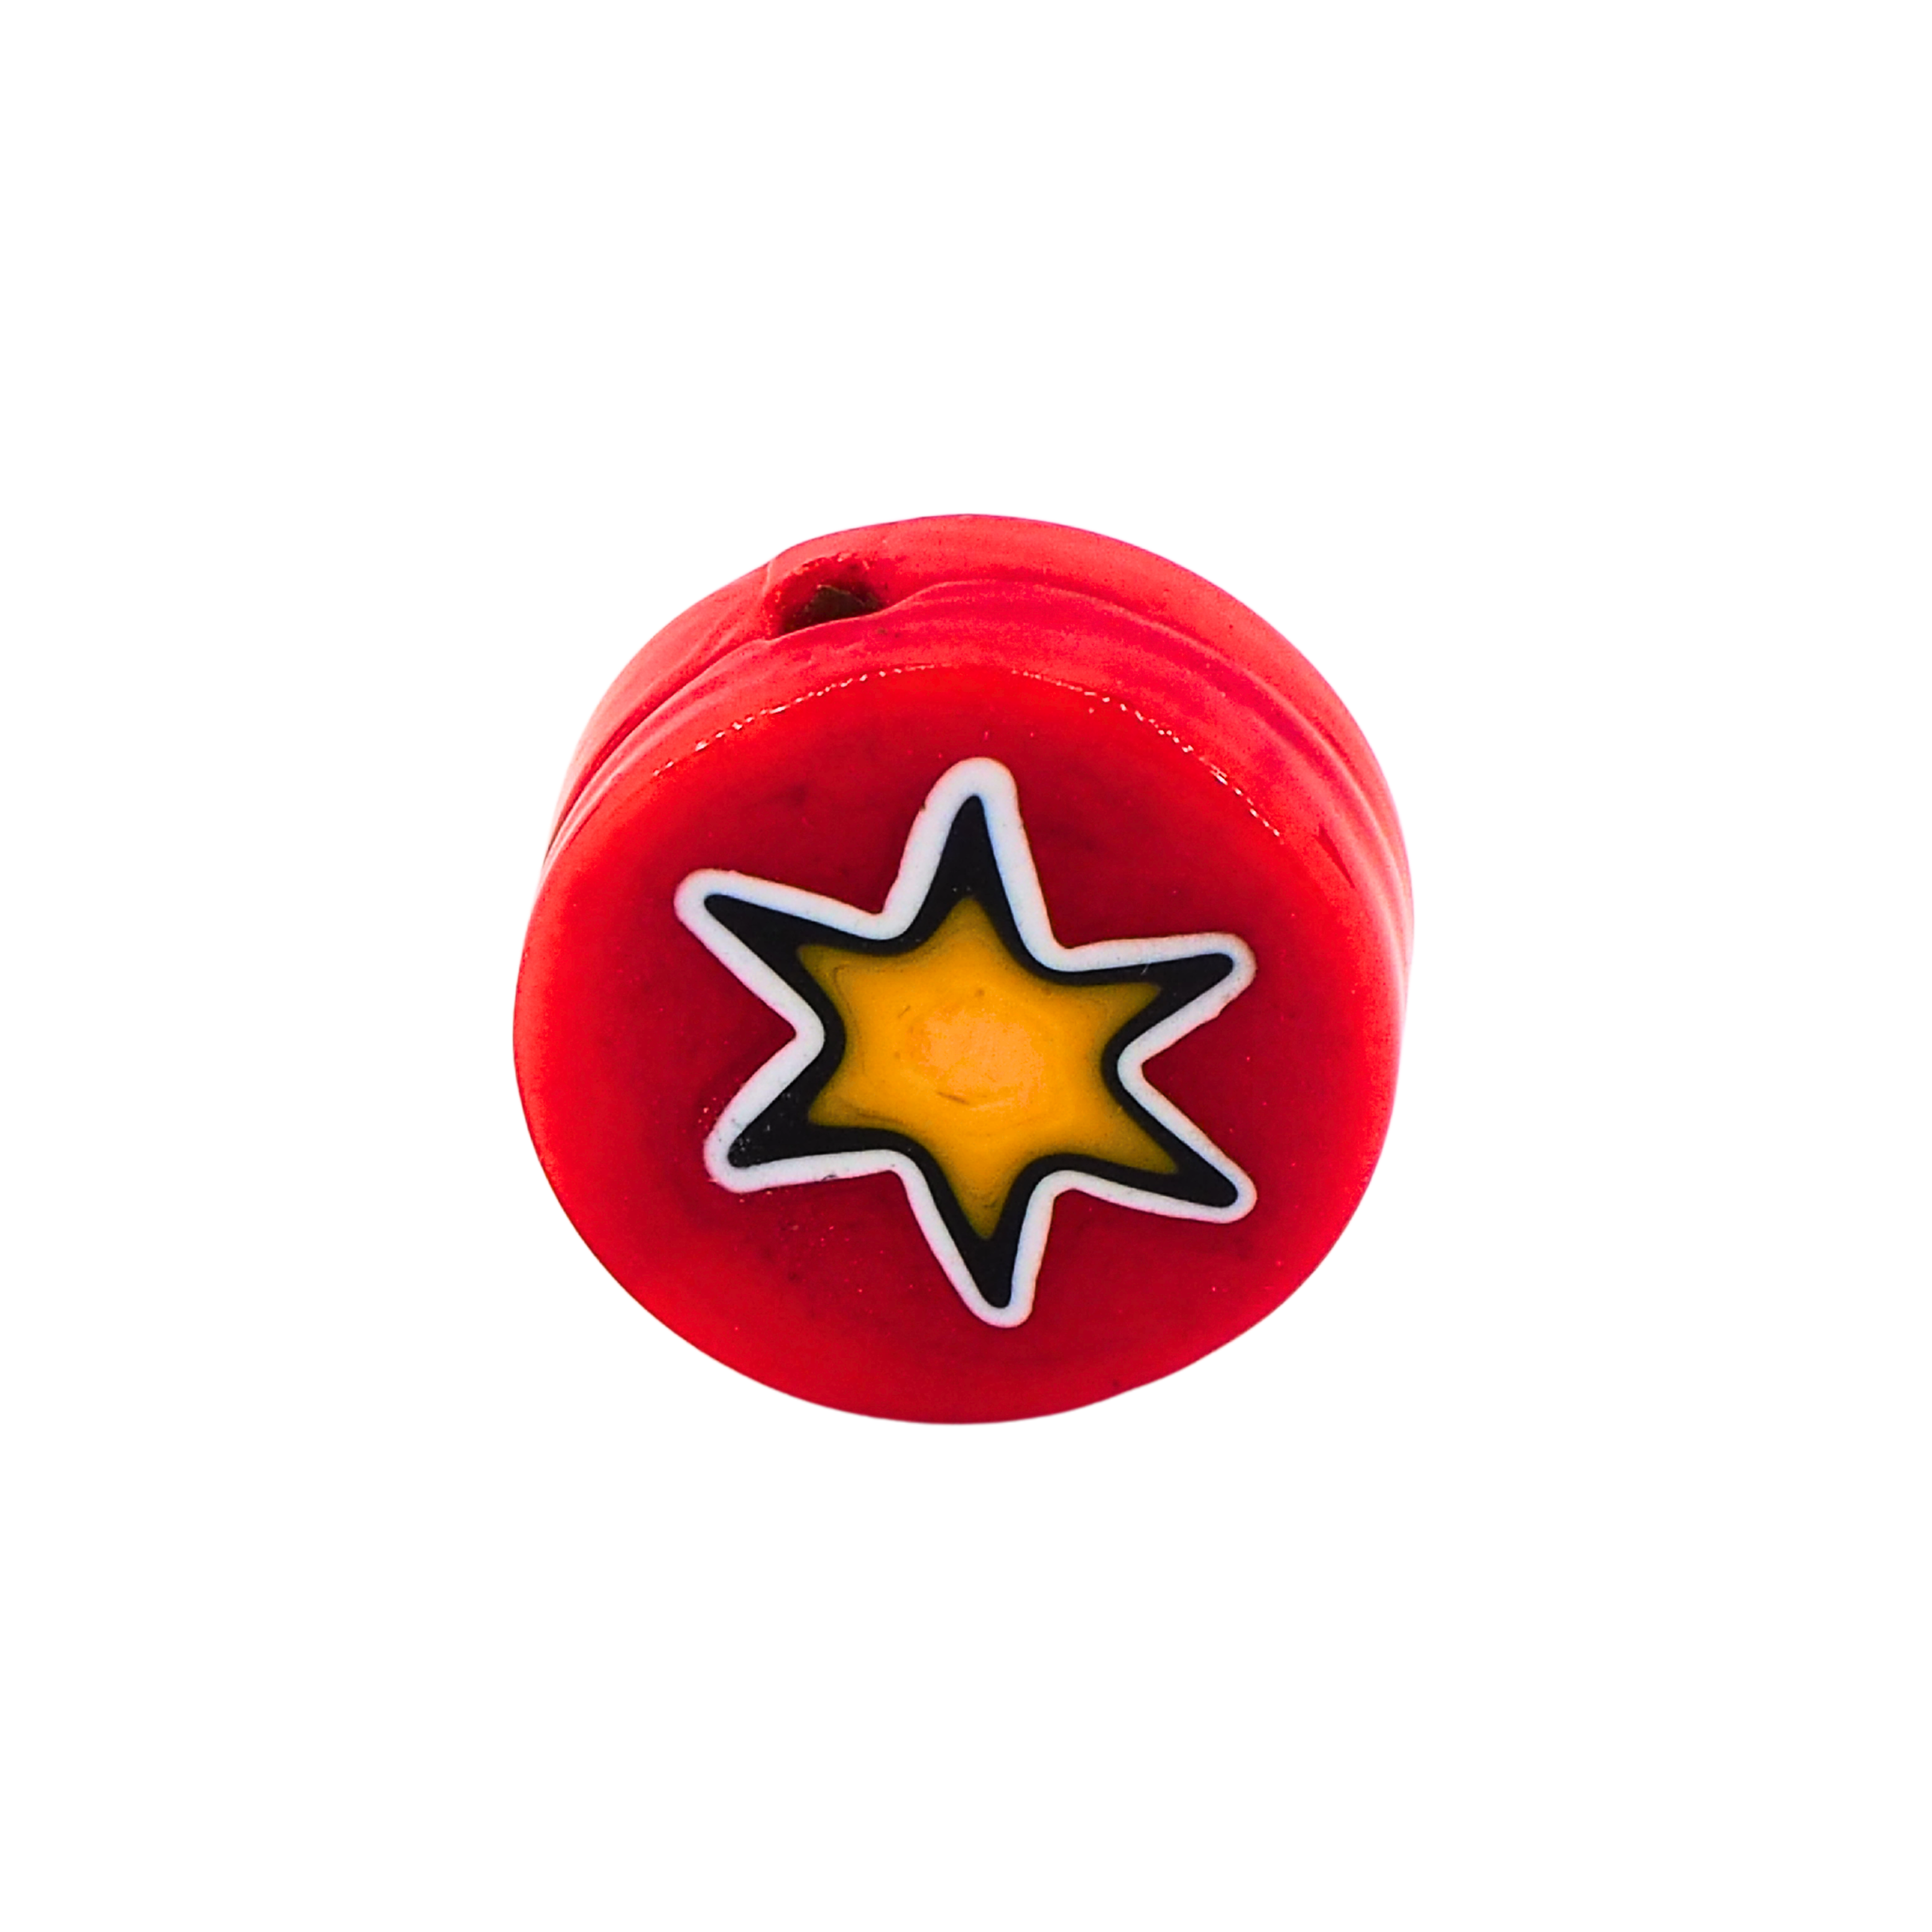 RED STAR 6 YELLOW